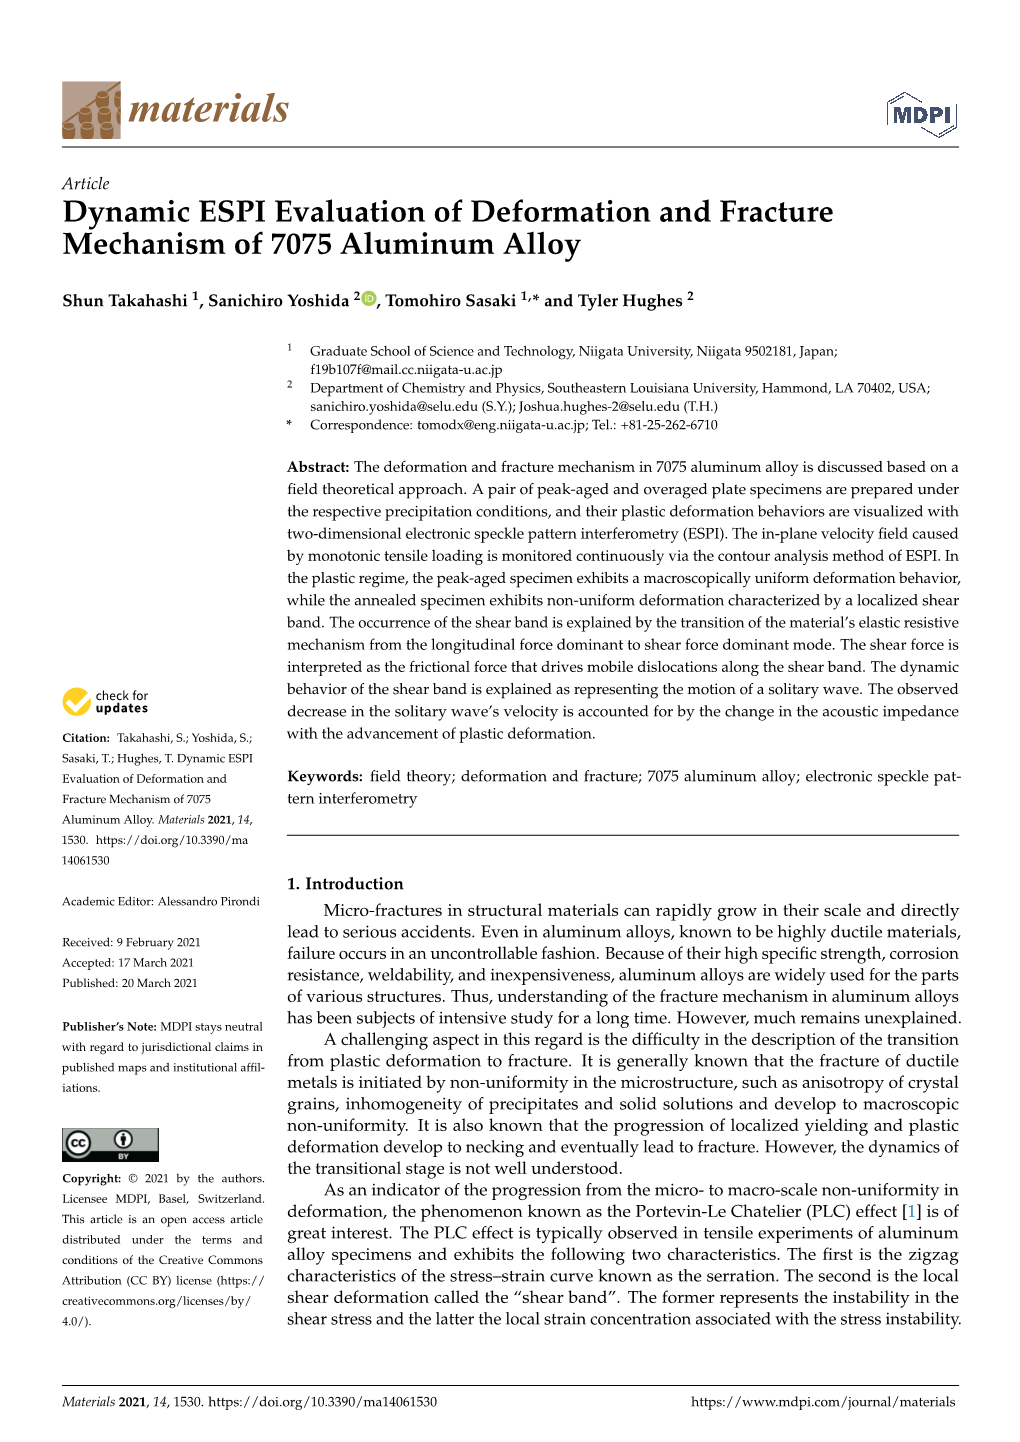 Dynamic ESPI Evaluation of Deformation and Fracture Mechanism of 7075 Aluminum Alloy